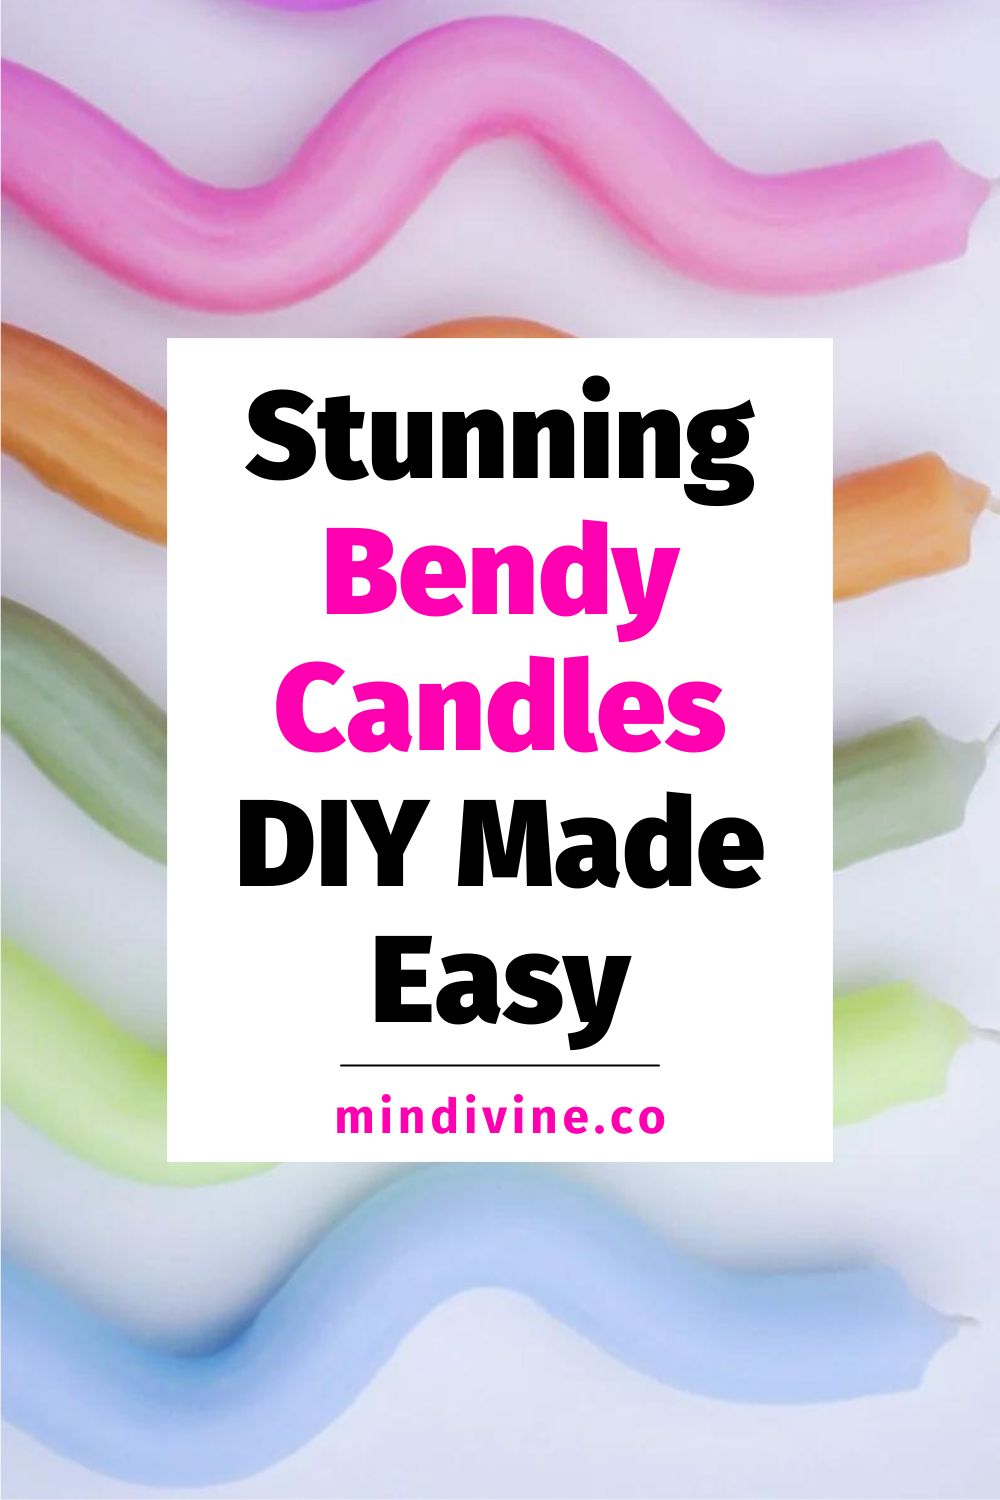 DIY Bendy Candles in different colors